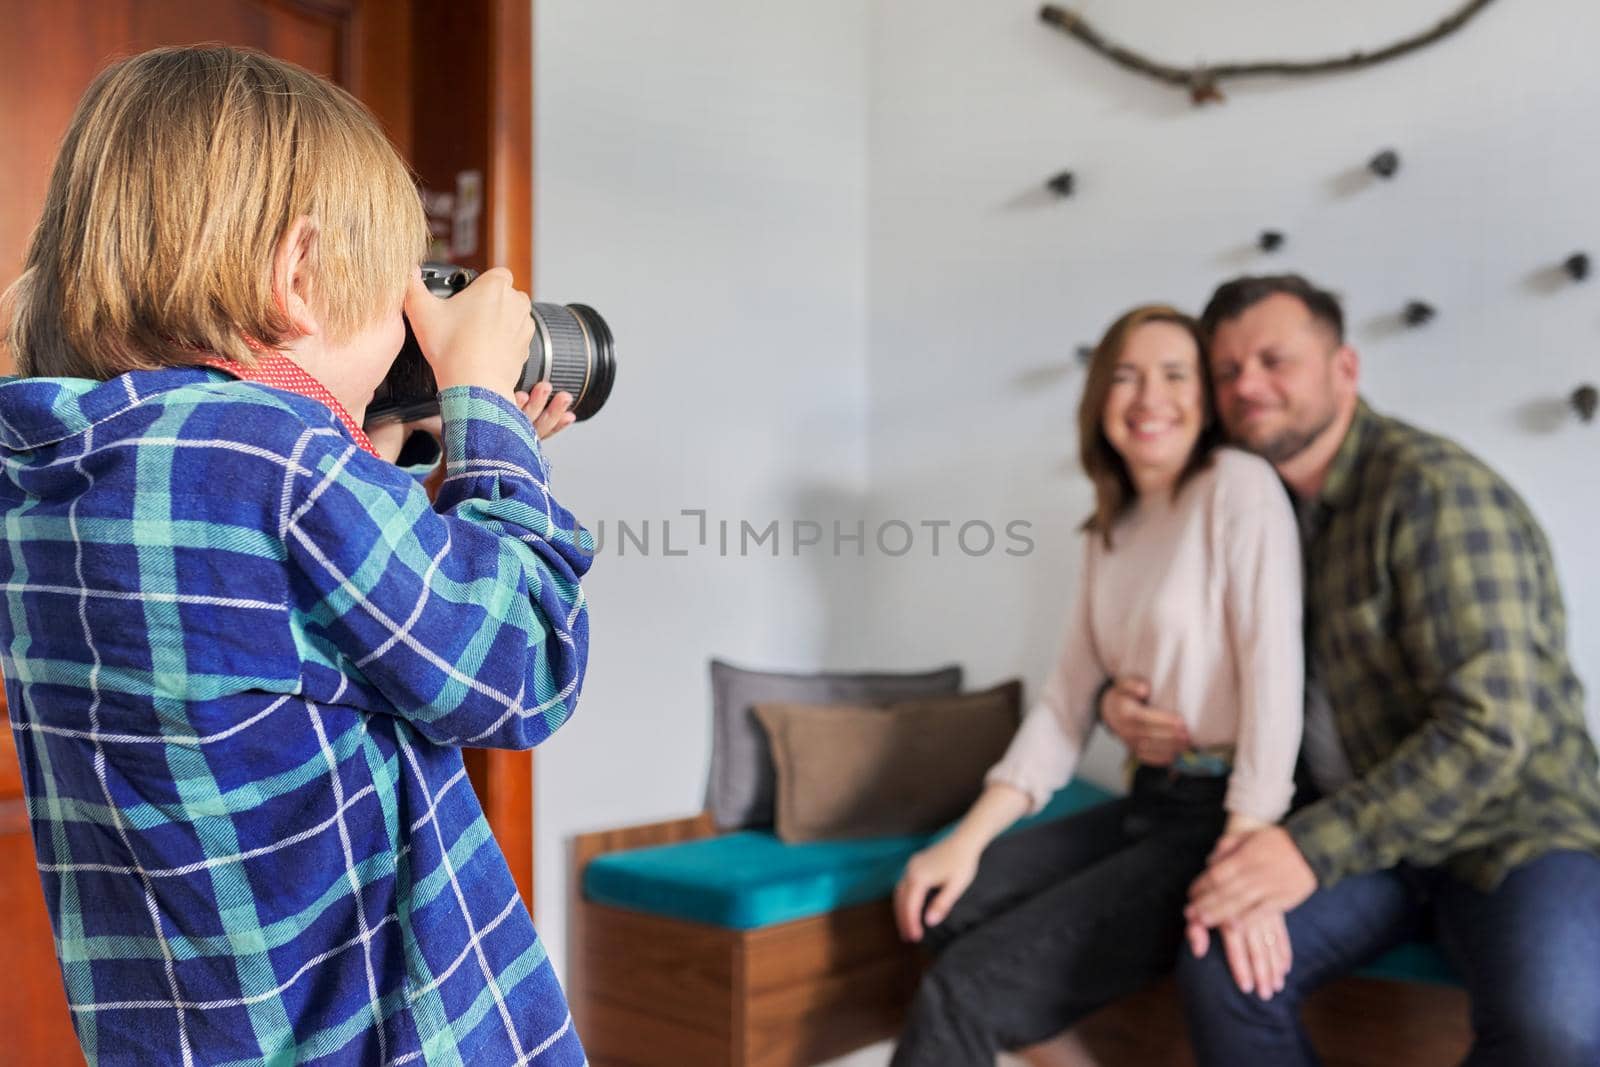 Happy family at home, little son with camera taking photo of hugging parents. Family, lifestyle, relationships, leisure, home life concept